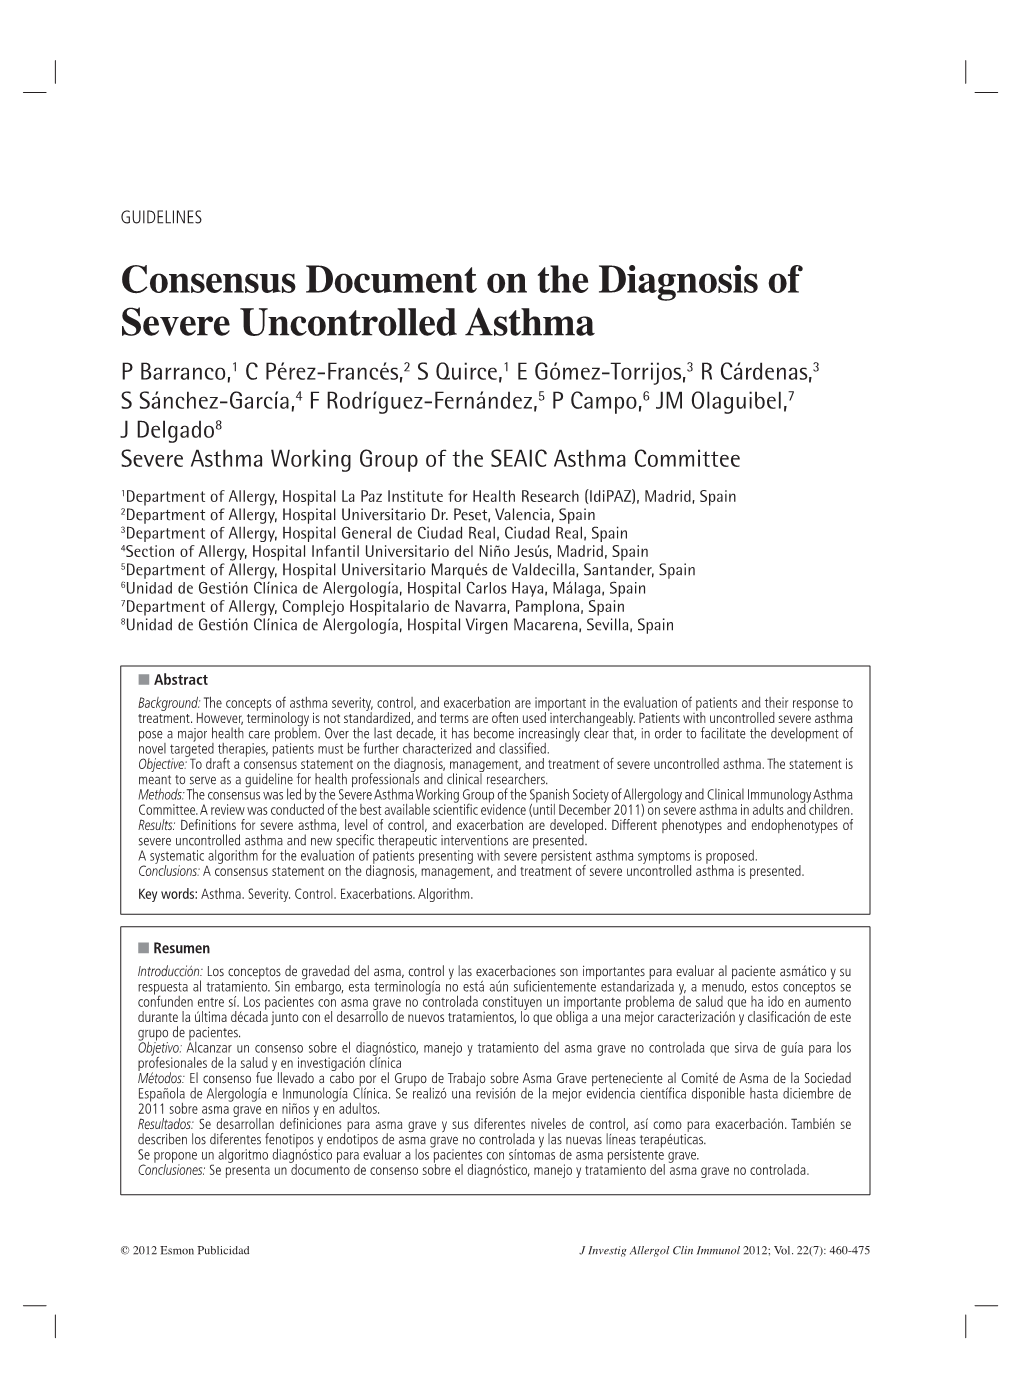 Consensus Document on the Diagnosis of Severe Uncontrolled